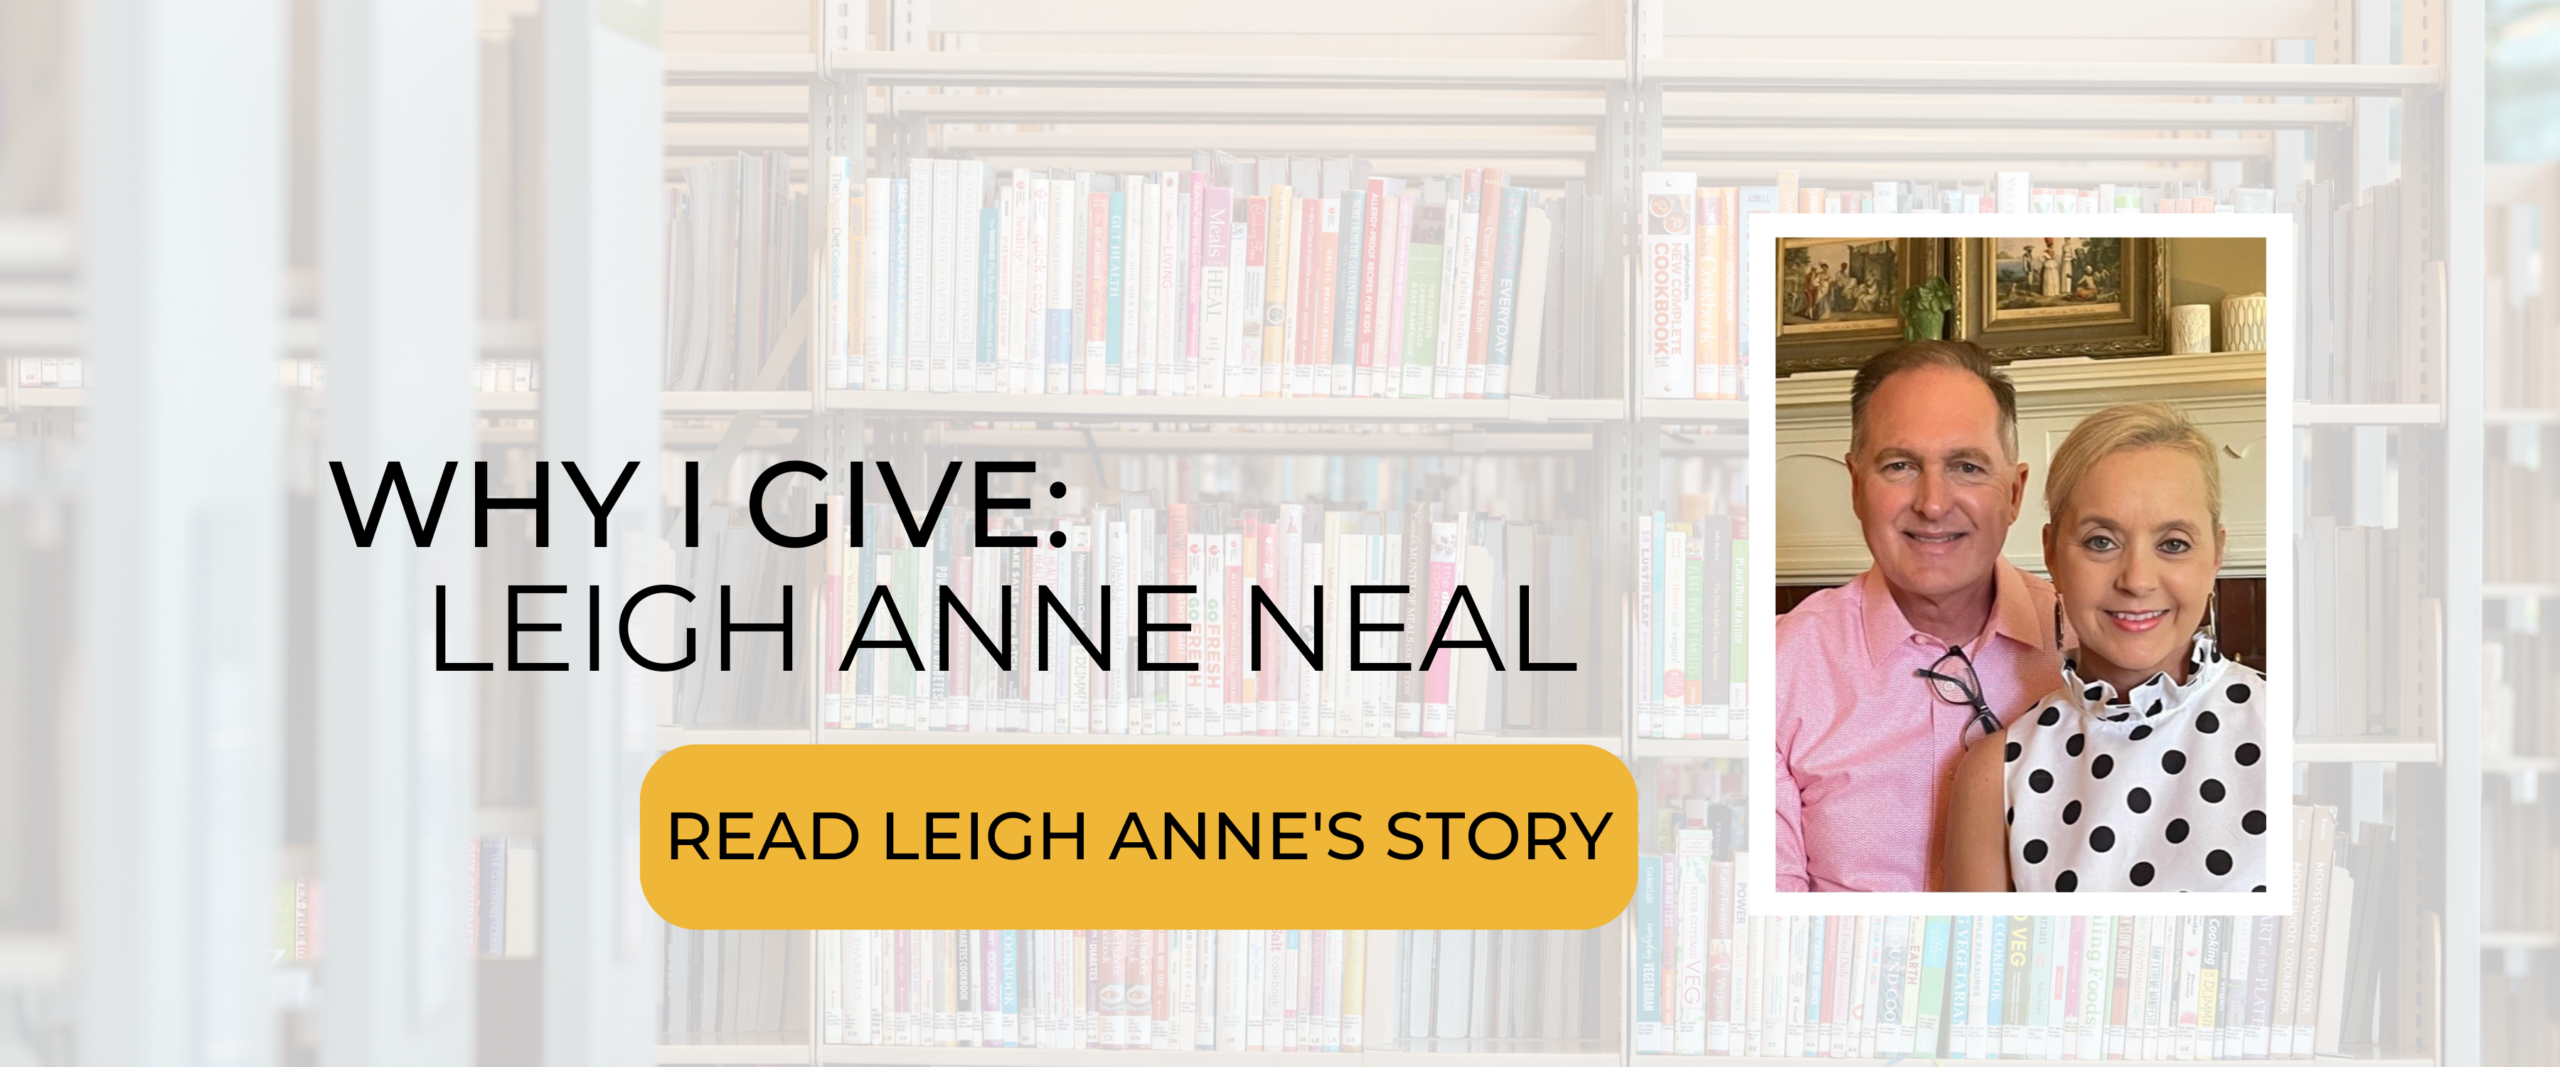 Why I Give: Leigh Anne Neal. Click to read her story!